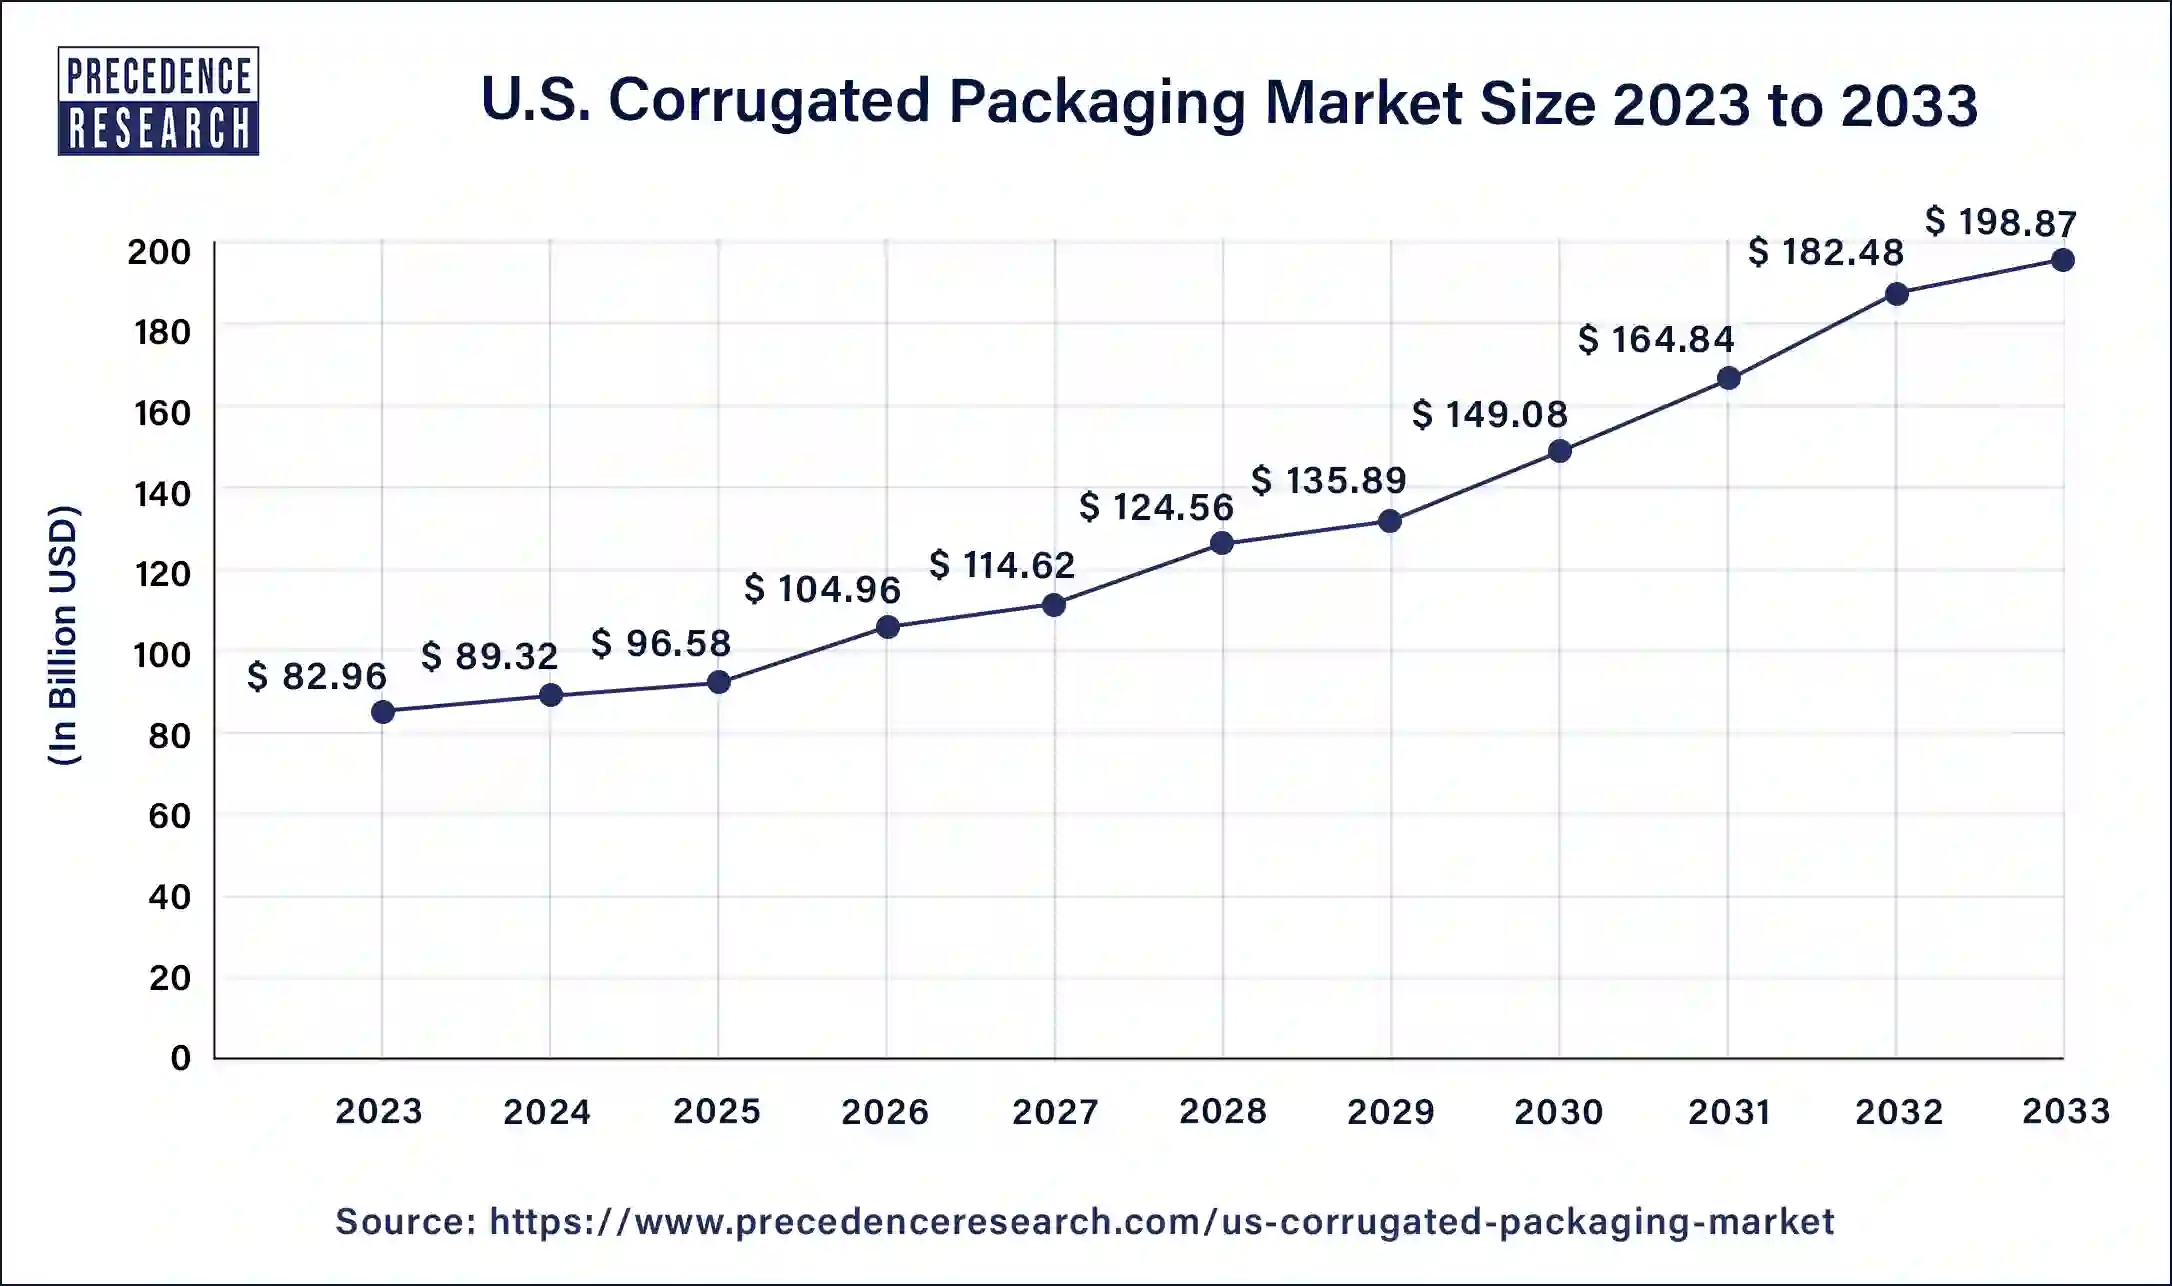 U.S. Corrugated Packaging Market Size 2024 to 2033